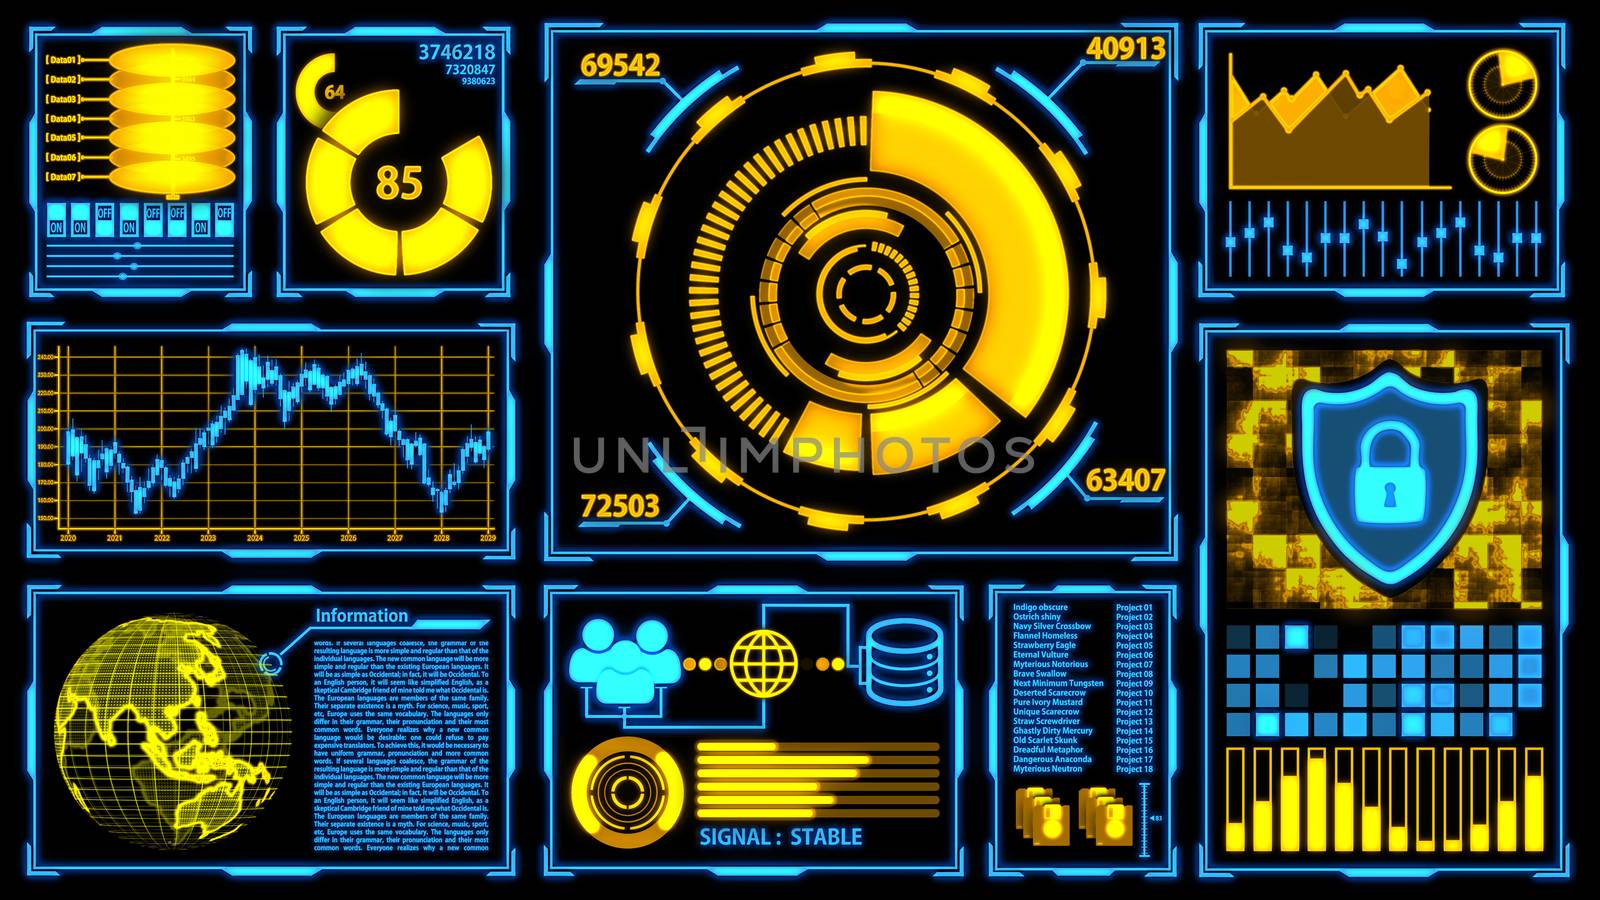 Data Transmission and Digital Transformation Screen with Details in Yellow-Blue color theme including Panels, Graphs, Charts , 3D Earth and digital elements Ver.1 (Full Screen) by ariya23156